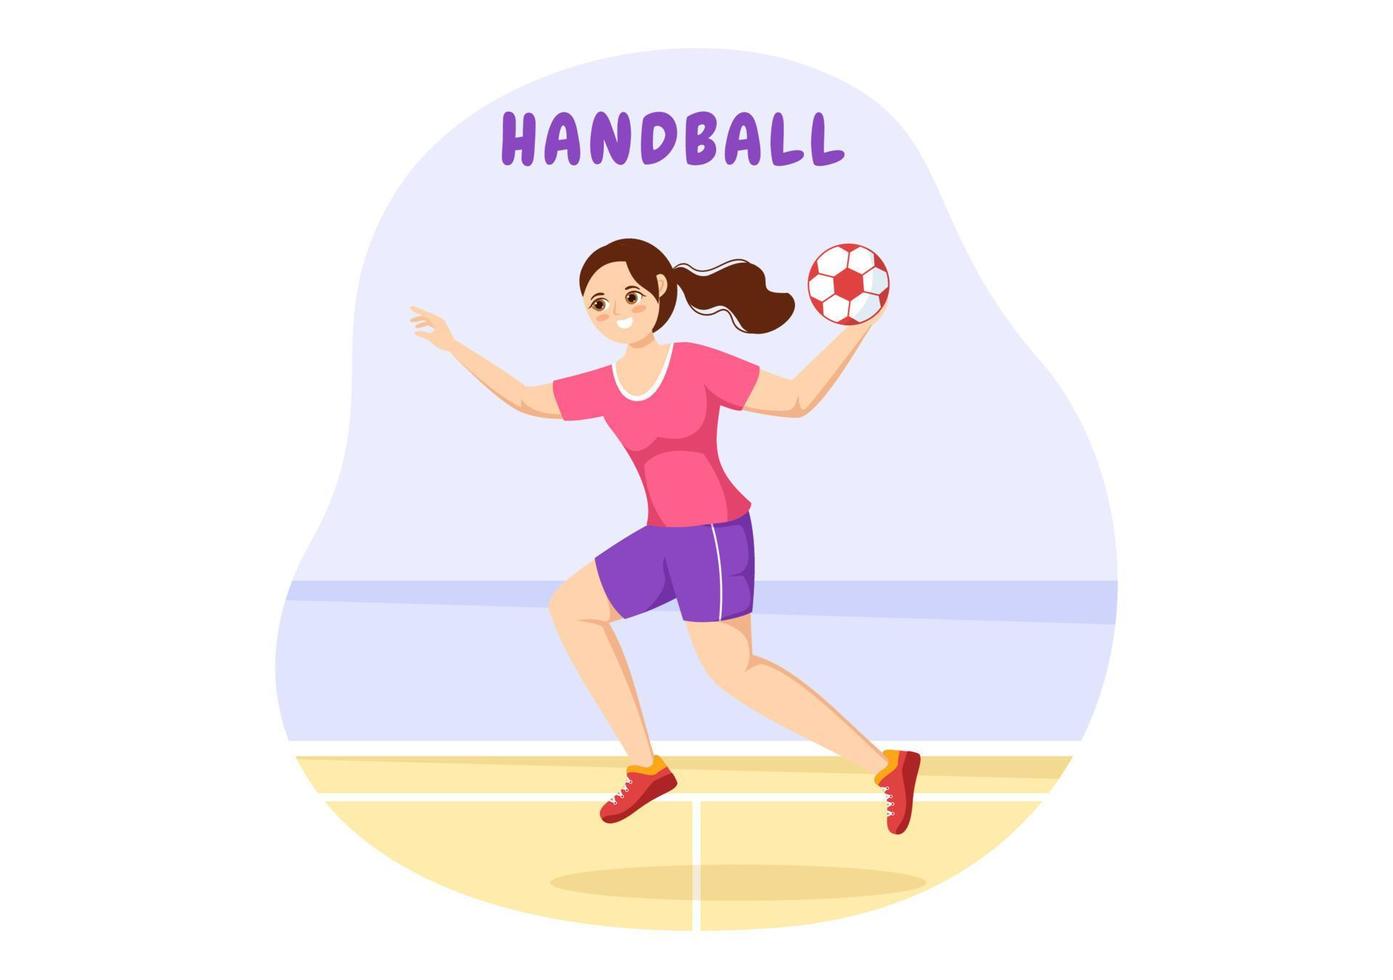 Handball Illustration of a Player Touching the Ball with His Hand and Scoring a Goal in a Sports Competition Flat Cartoon Hand Drawing Template vector